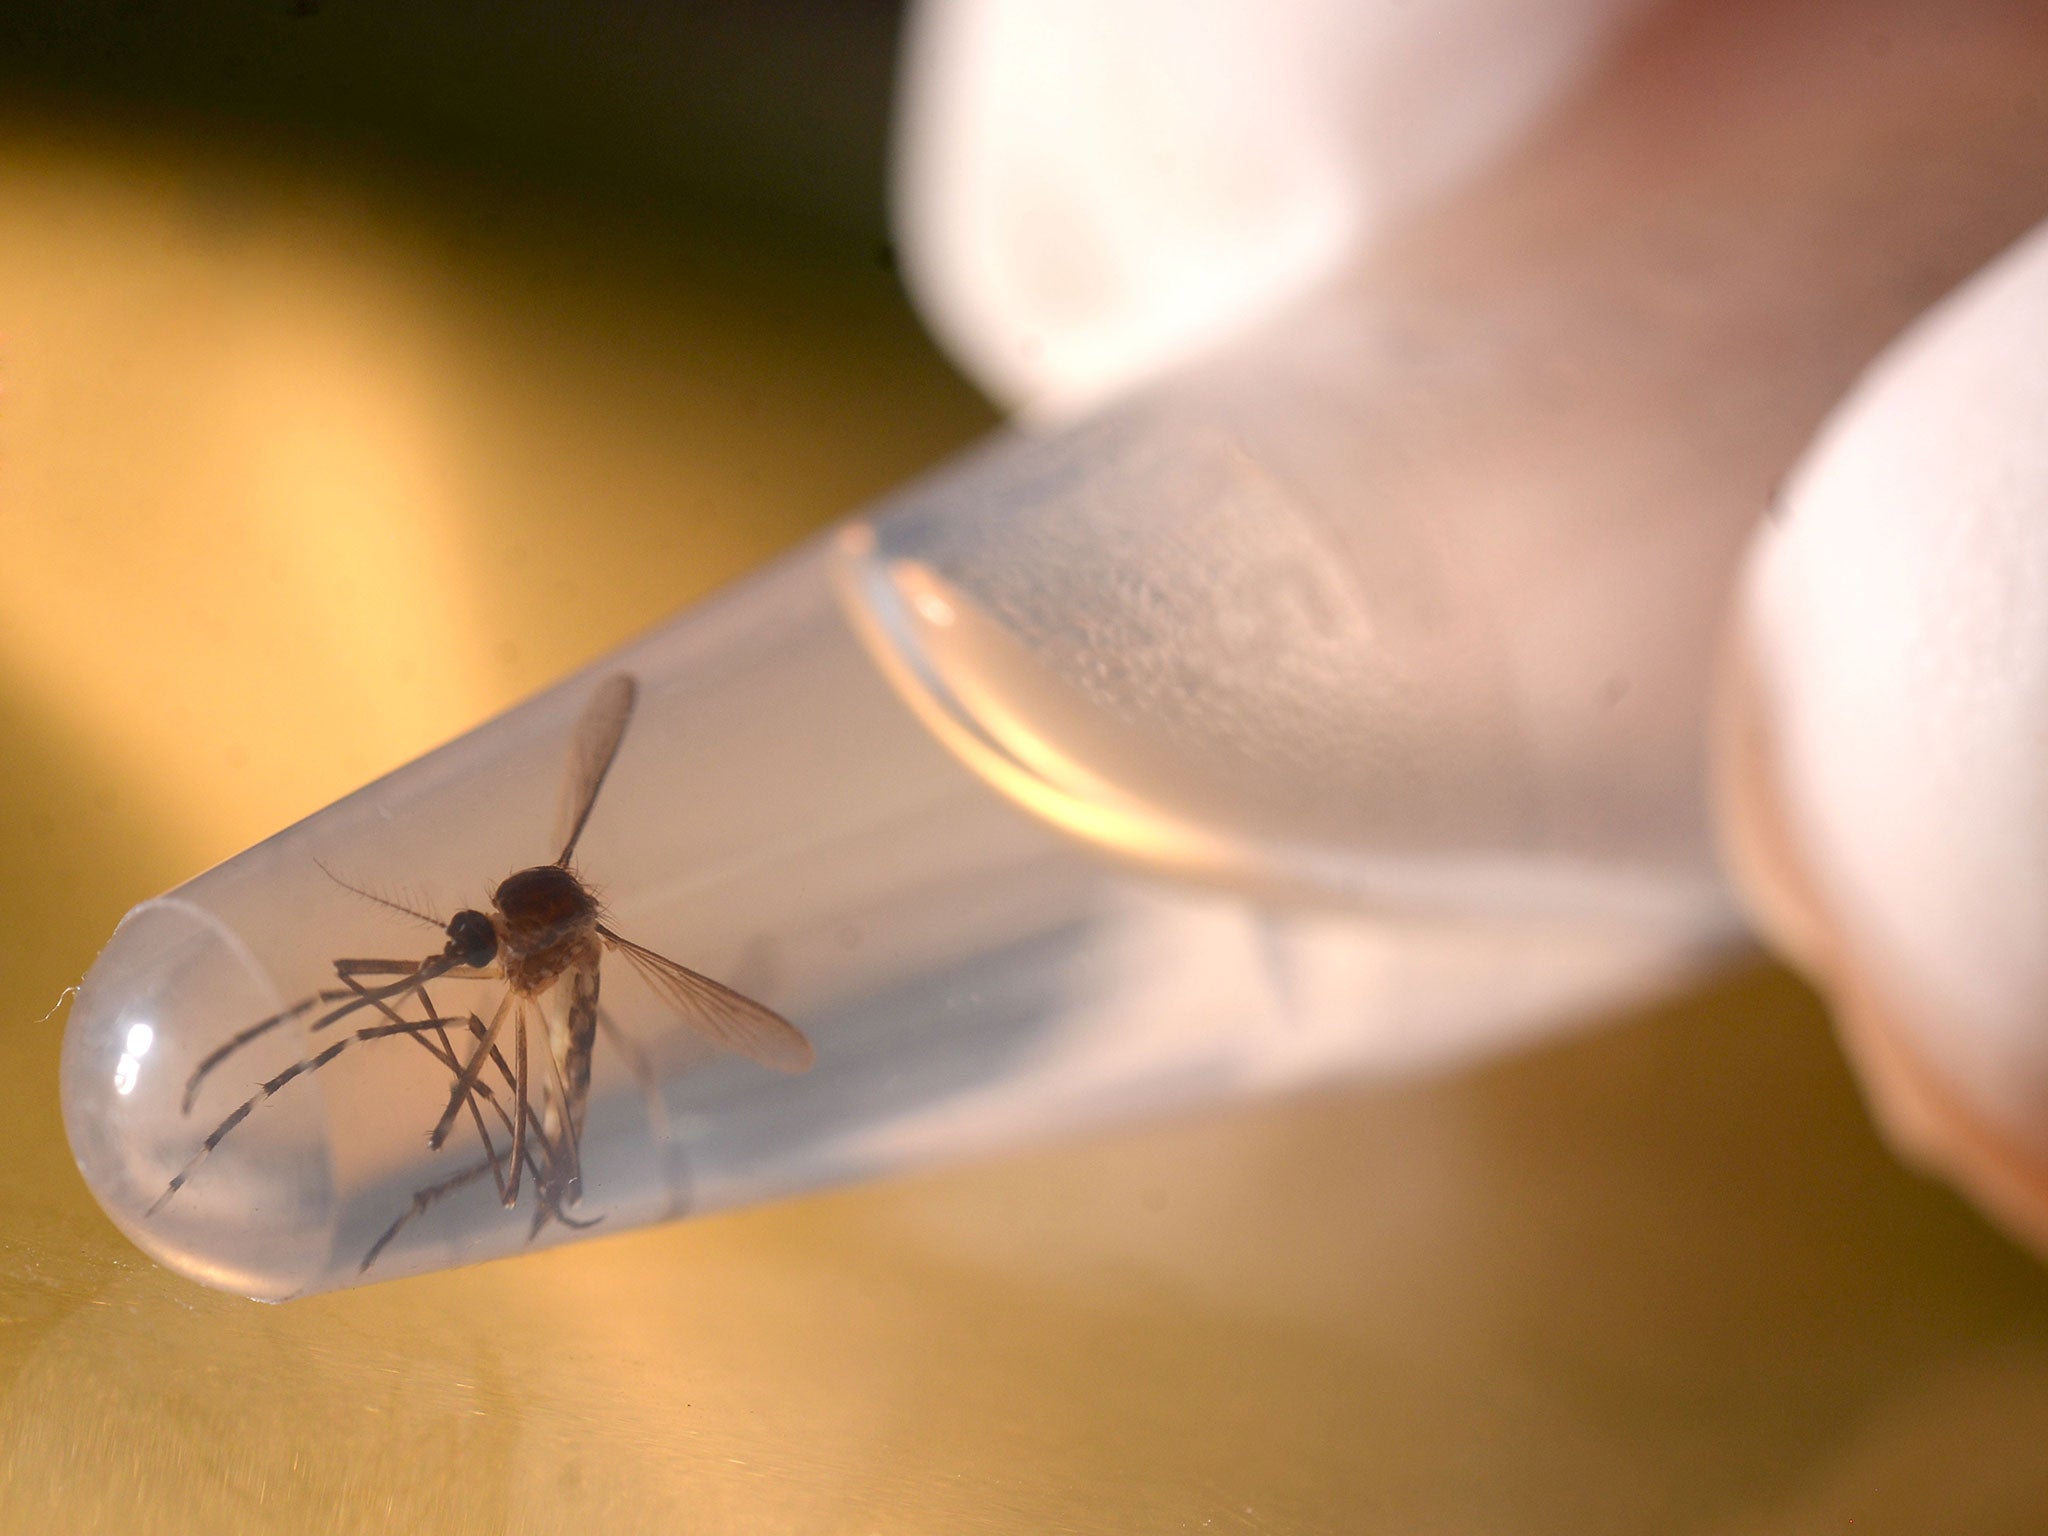 Experts warn that Zika, which has been linked to birth defects, could spread as mosquitoes migrate due to warmer summer weather